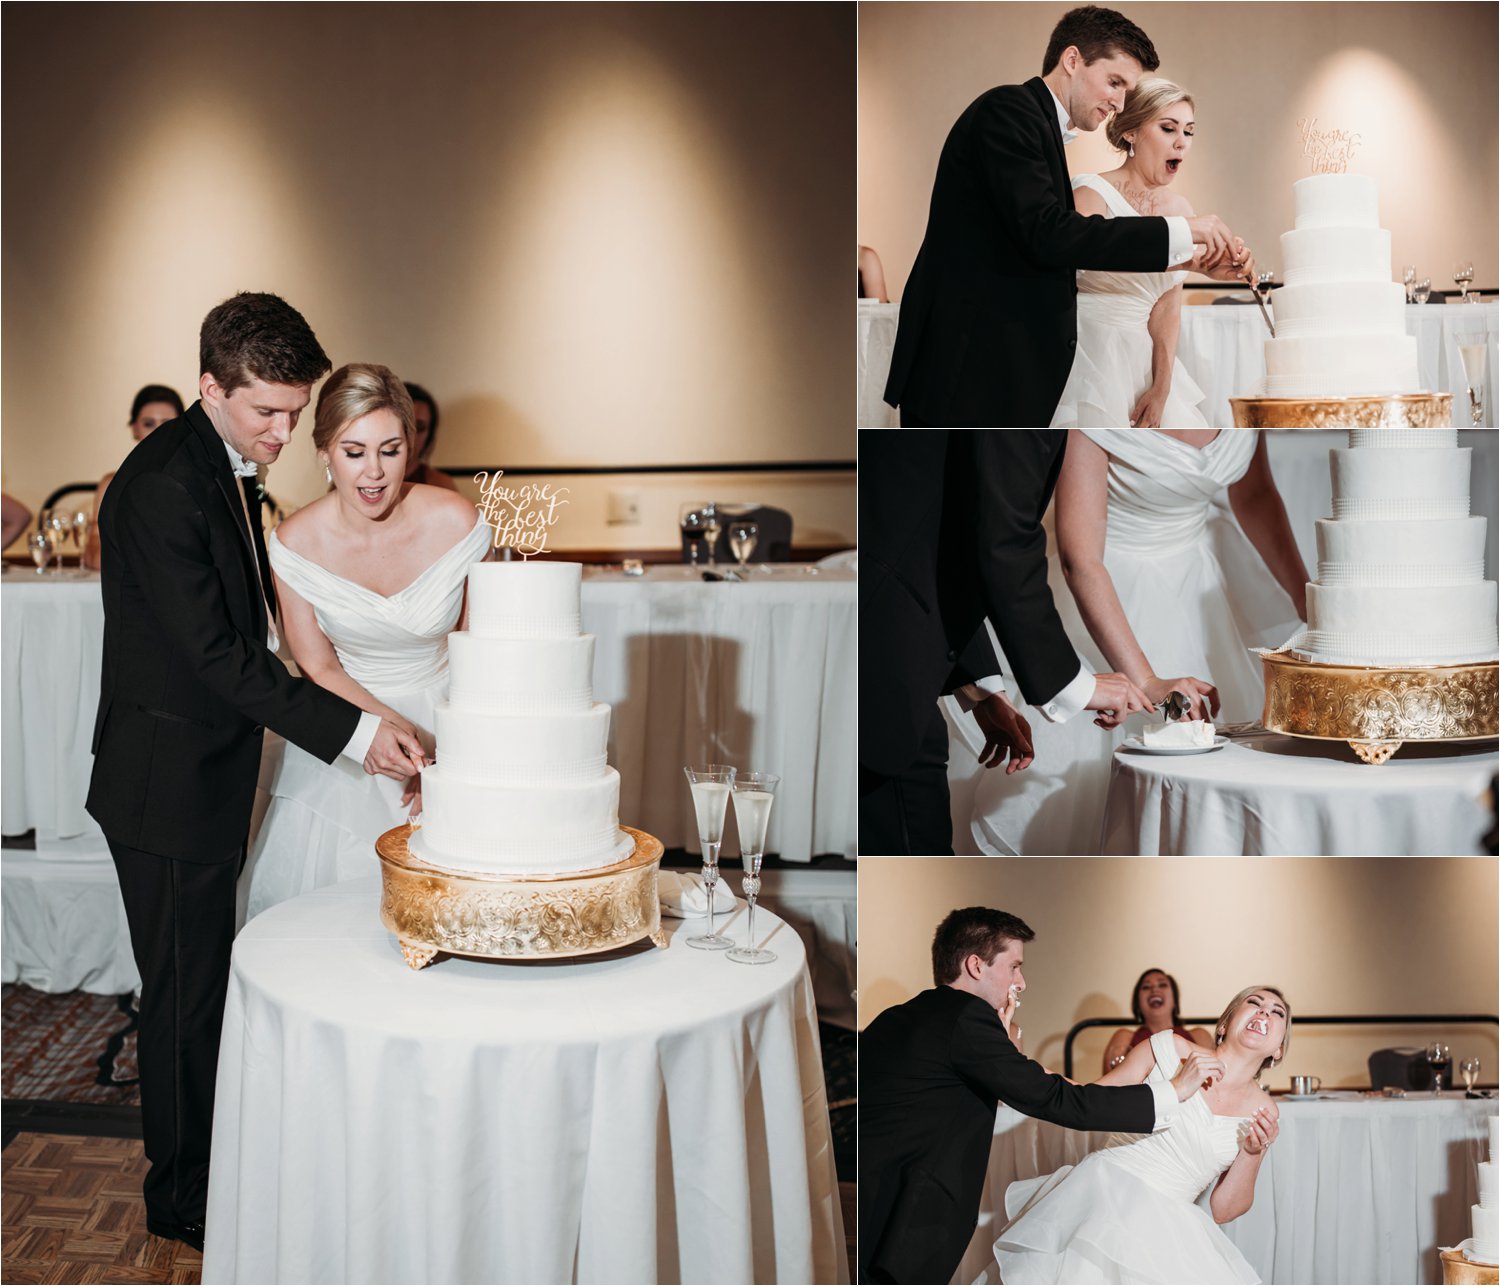  images by feliciathephotographer.com | destination wedding photographer | kansas city | summertime | classic | cake cutting | reception | details | sugar and spice catering | four tiers | pearl embellishments | silly | laughter | you are the best thing topper | 